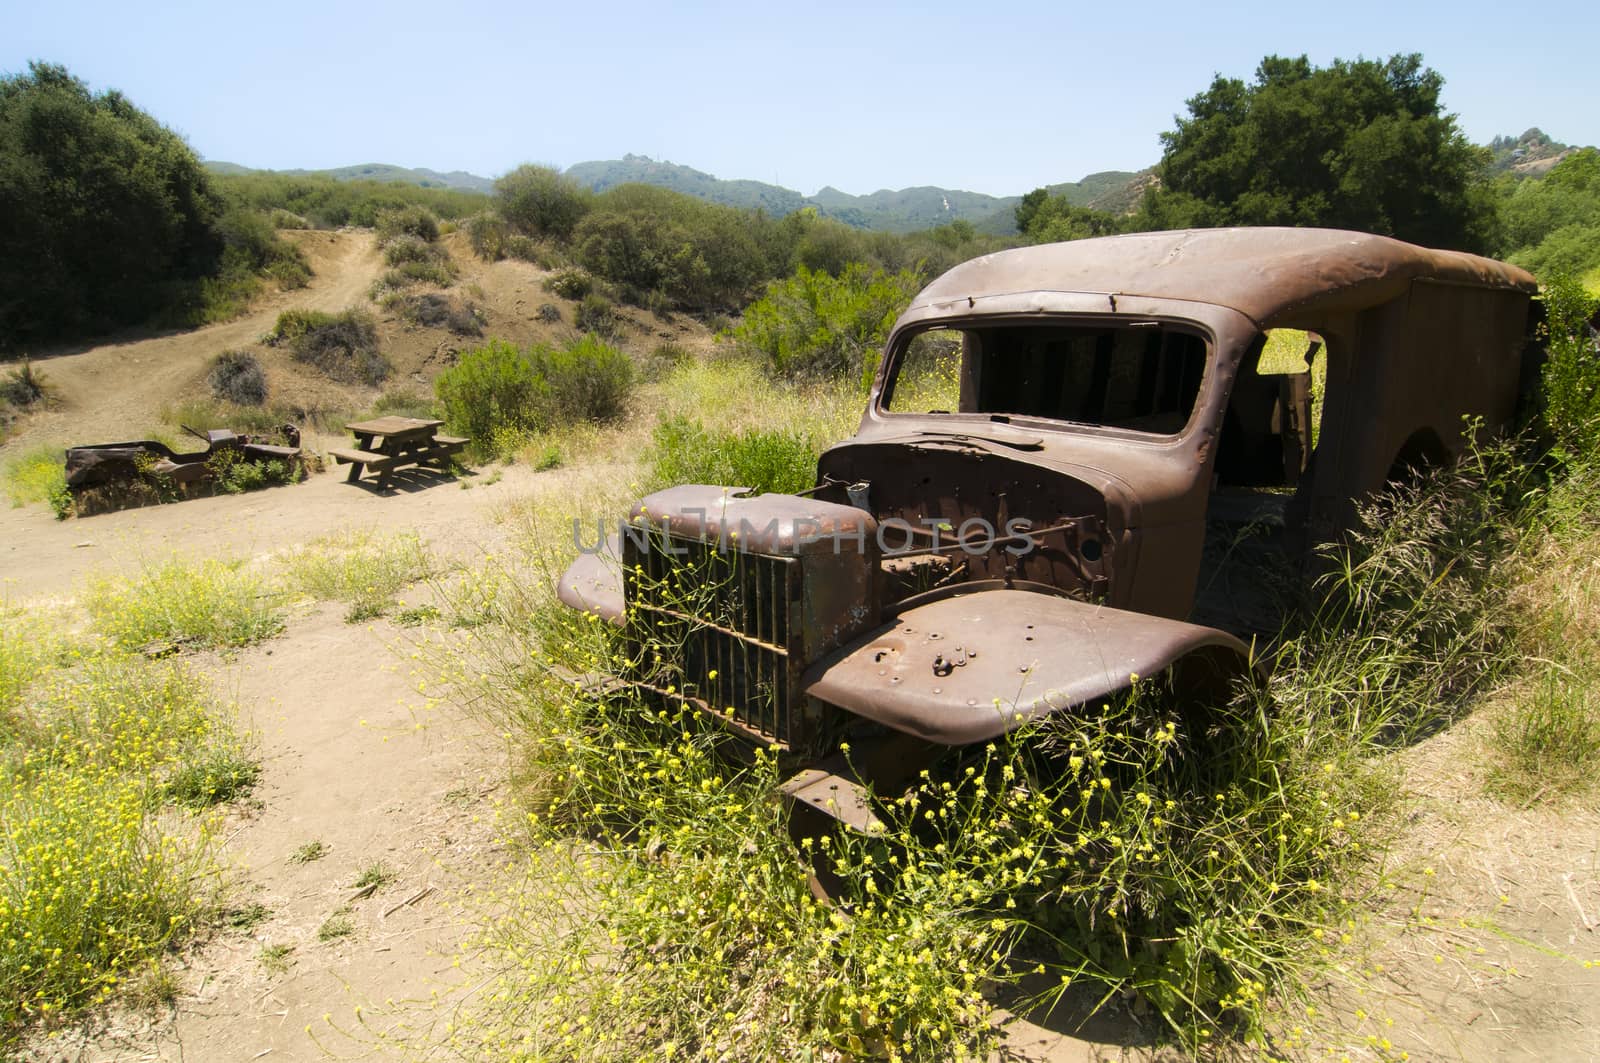 Remains of M.A.S.H. filming site in Malibu Creek State Park, CA by Njean